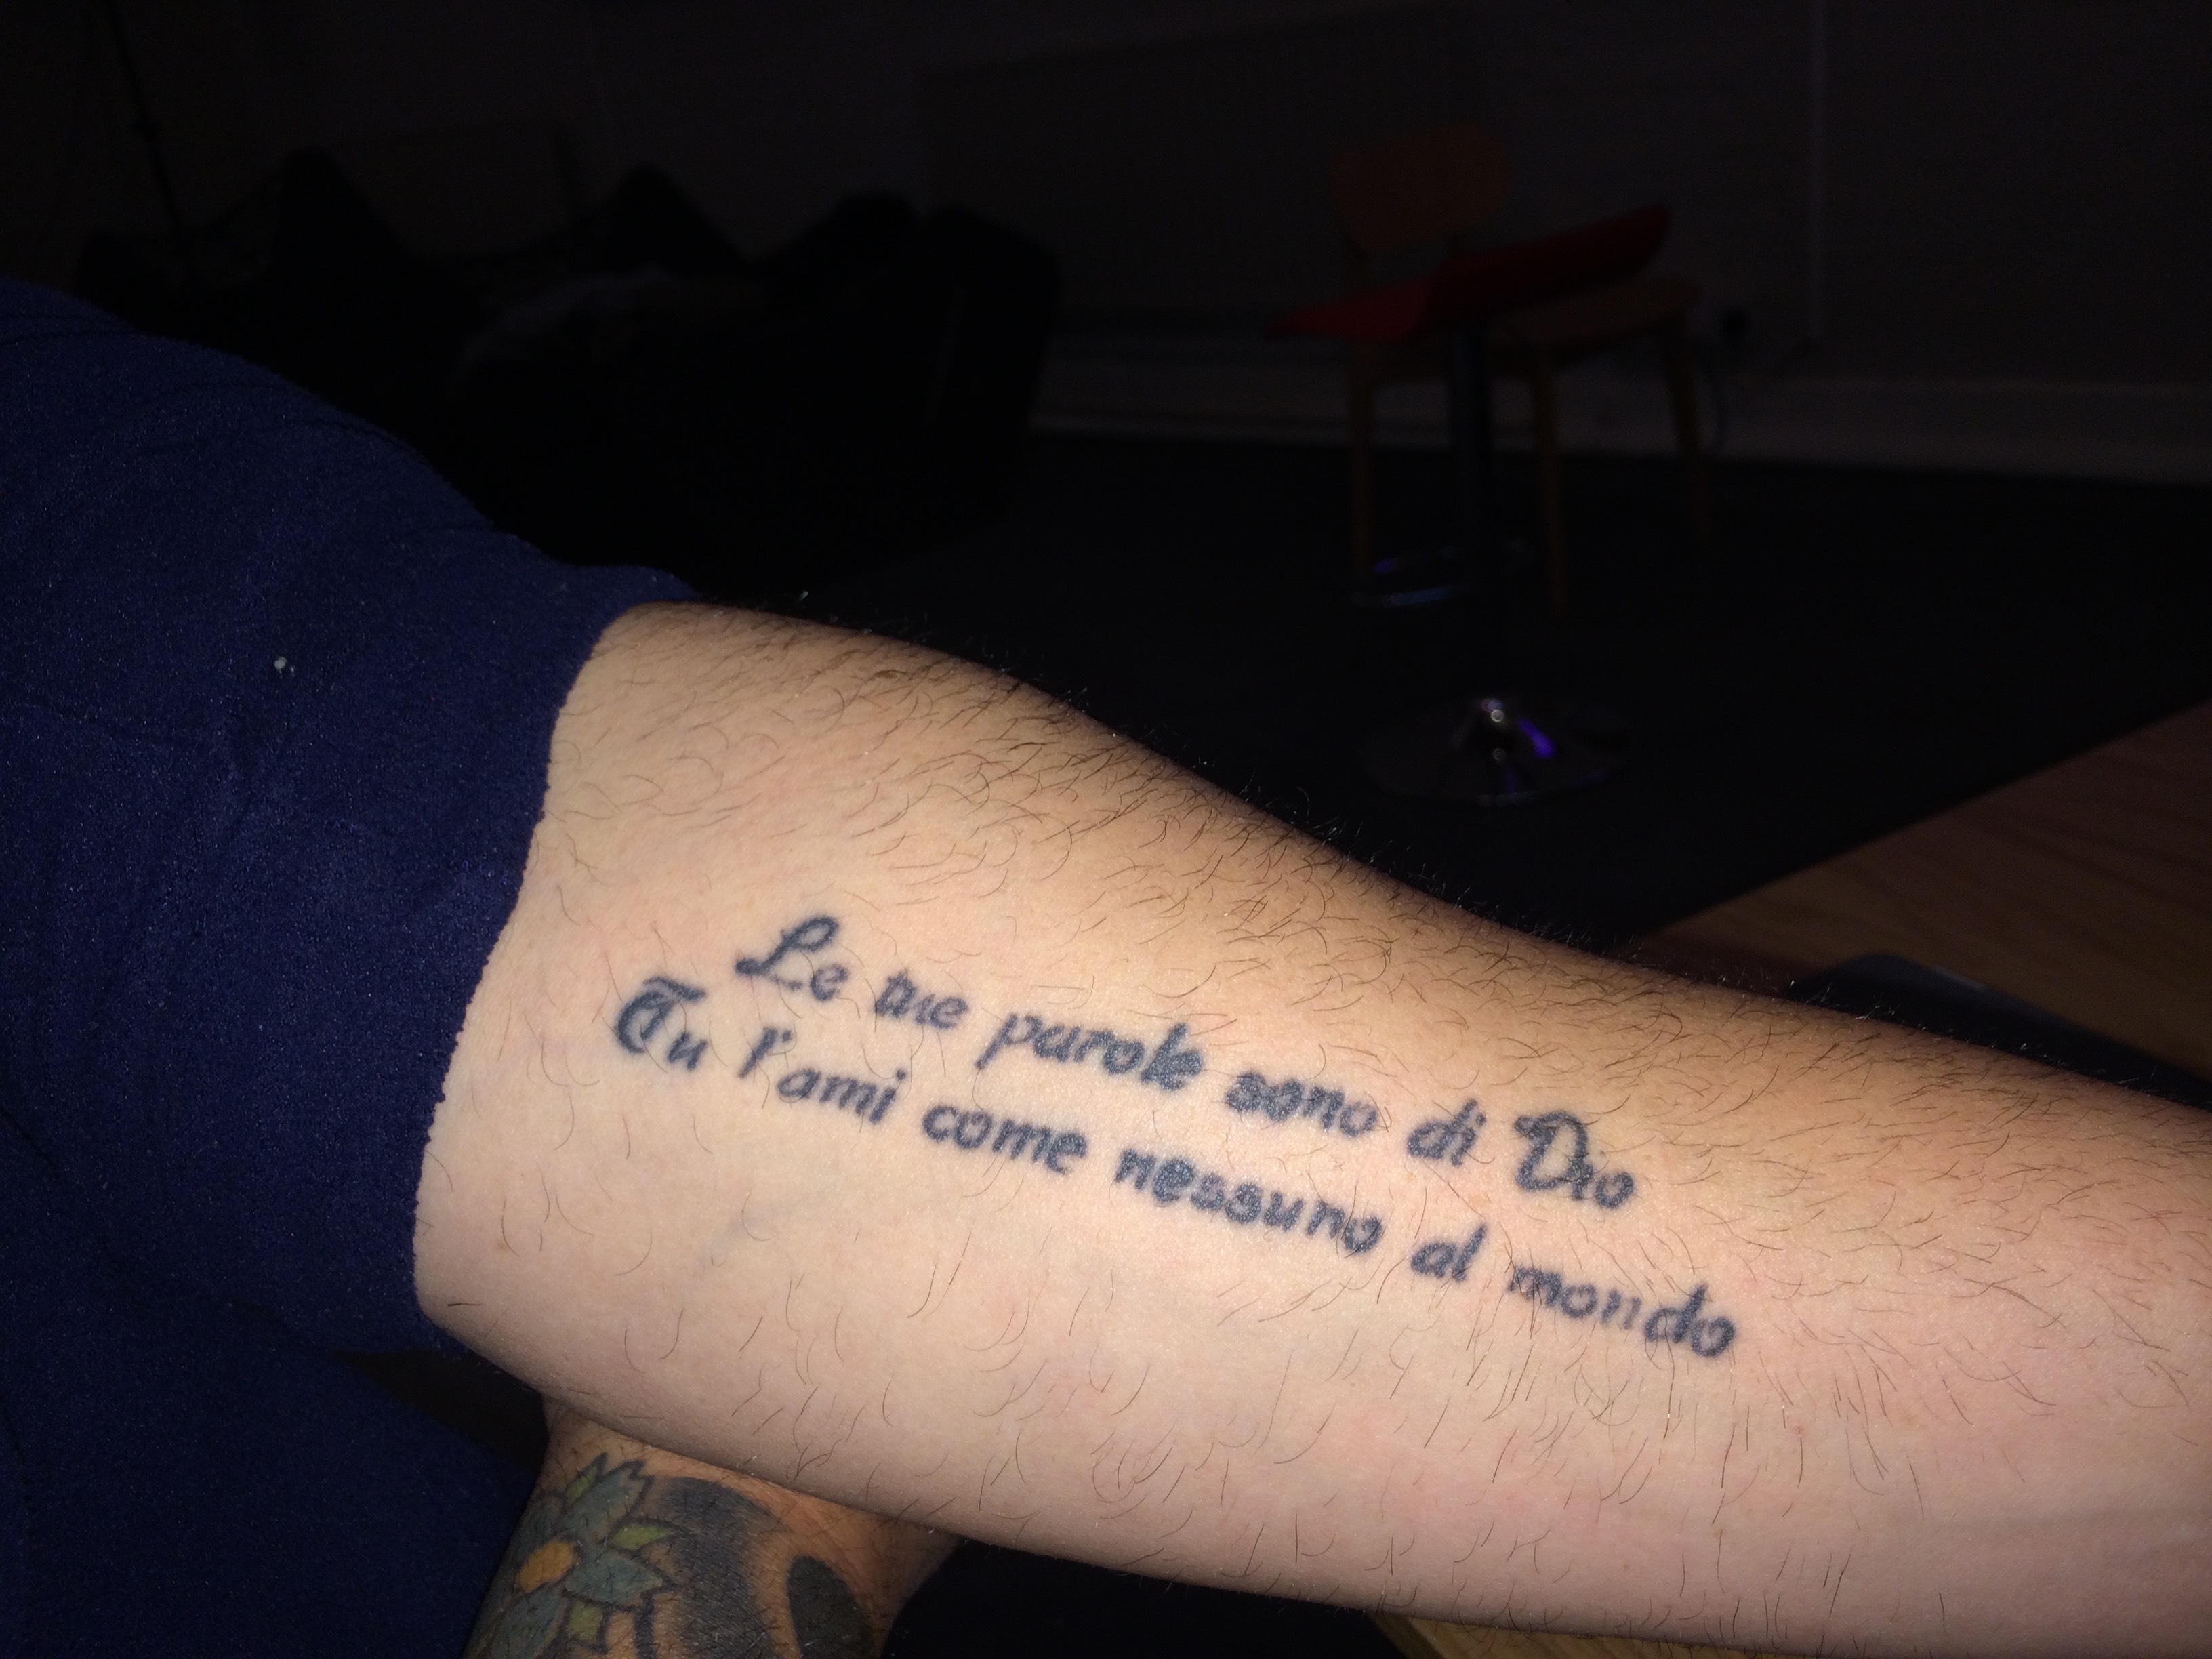 Operatic ink: "Your words are as if from God"